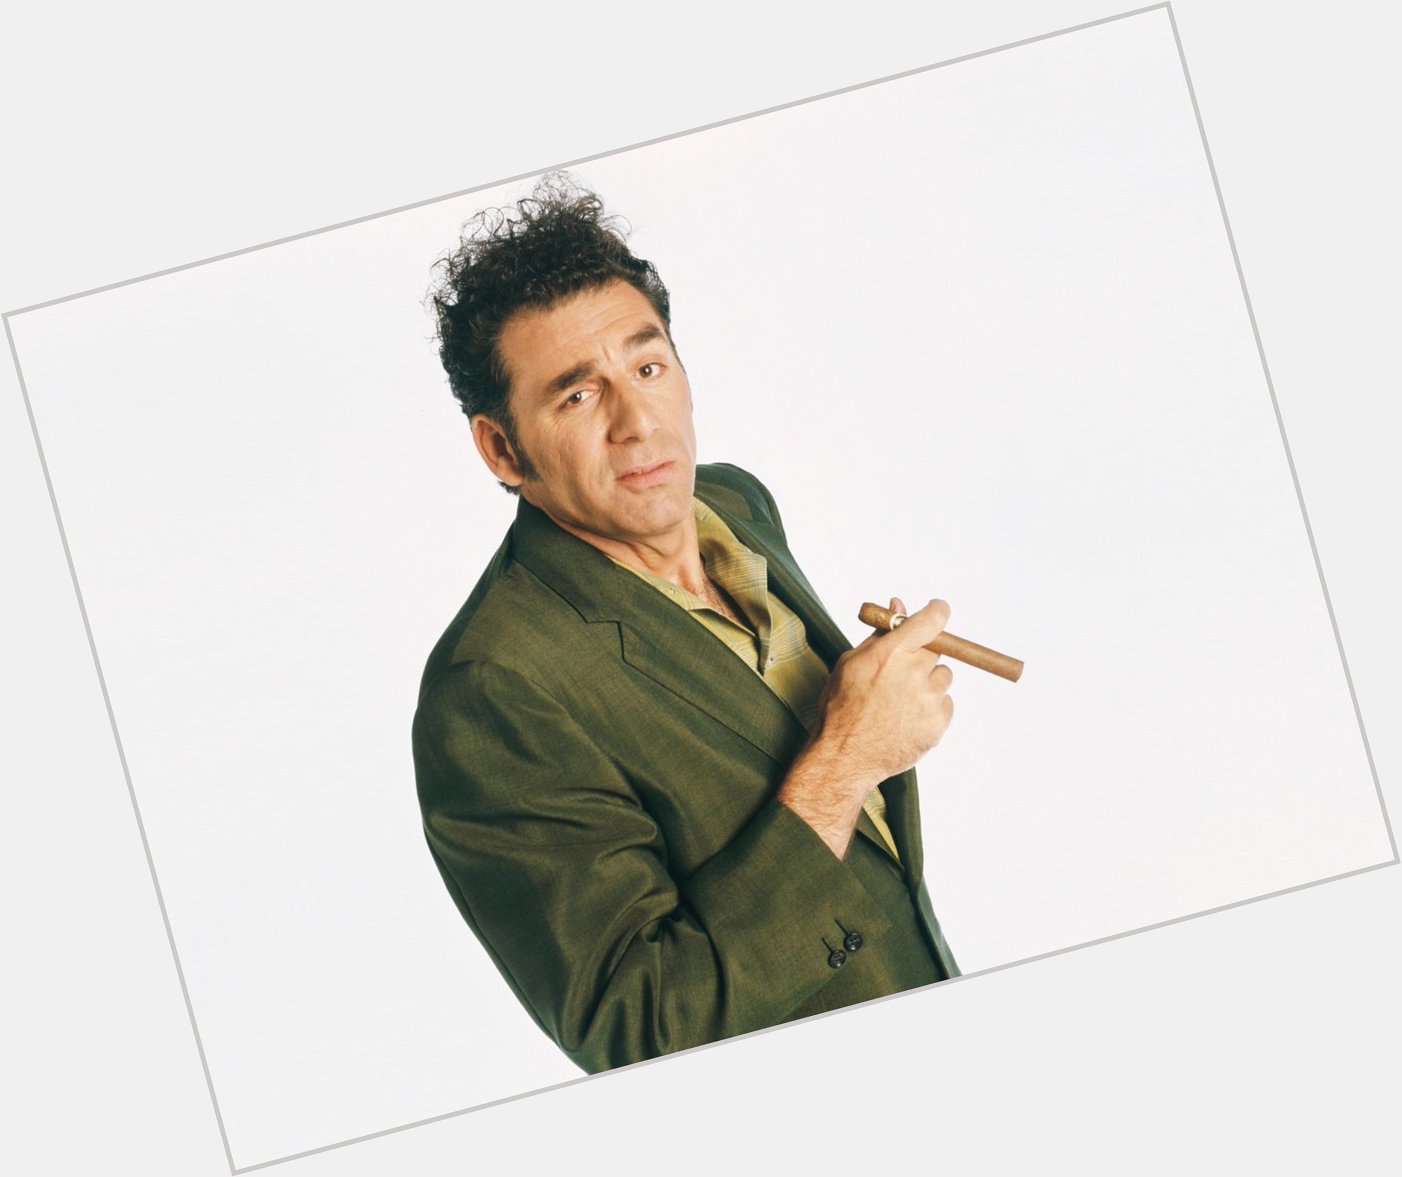 Happy Birthday to Michael Richards!
Was Kramer your favorite Seinfeld character?  